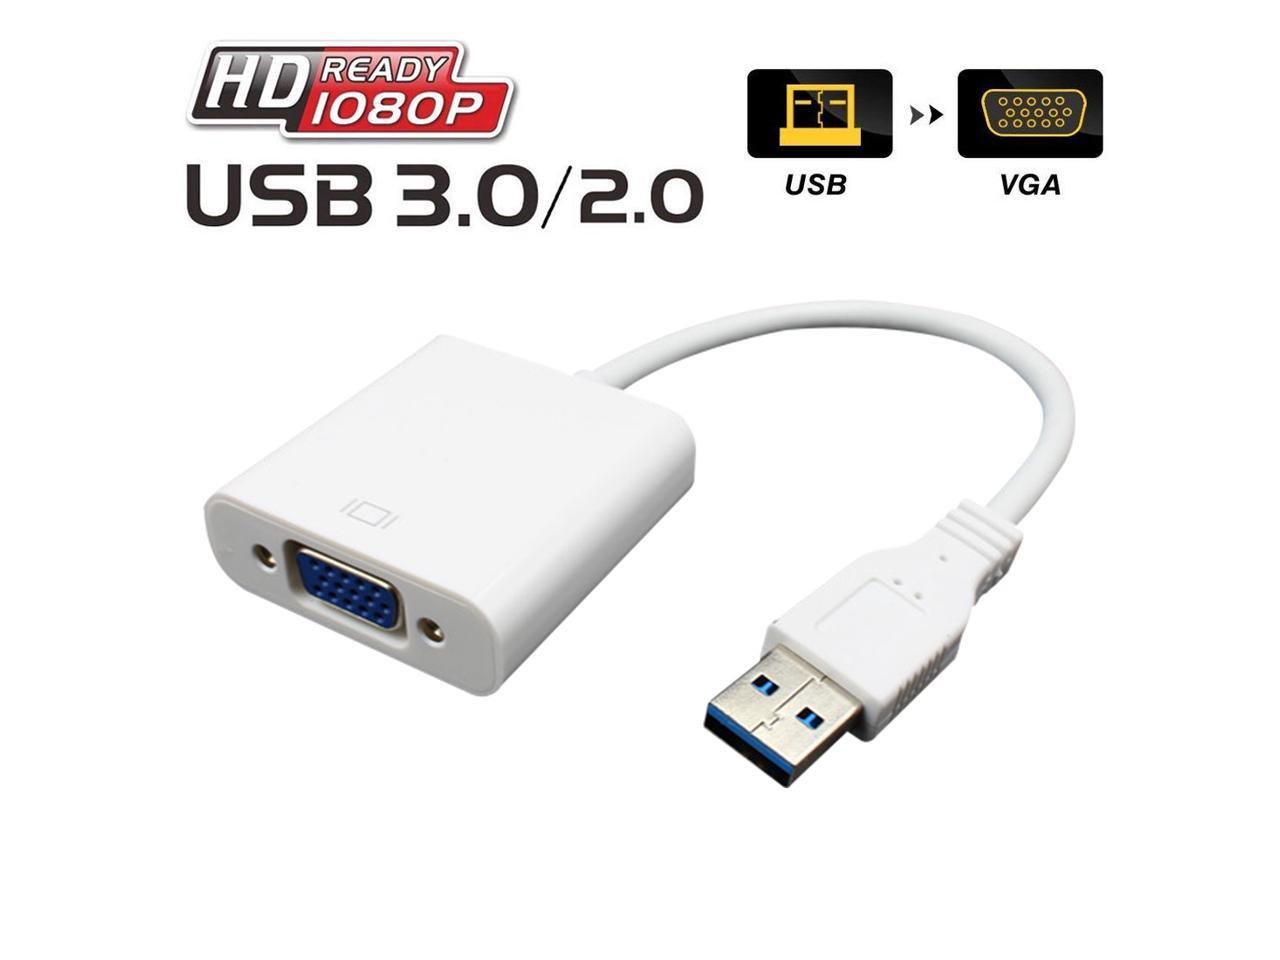 USB 3.0 to VGA Adapter Compatible with Windows 10/8.1/8/7/XP for PC Laptop Desktop Projector HDTV Support Resolution 1080p Multi Display Video Converter USB to VGA Multi-Display Video Adapter 